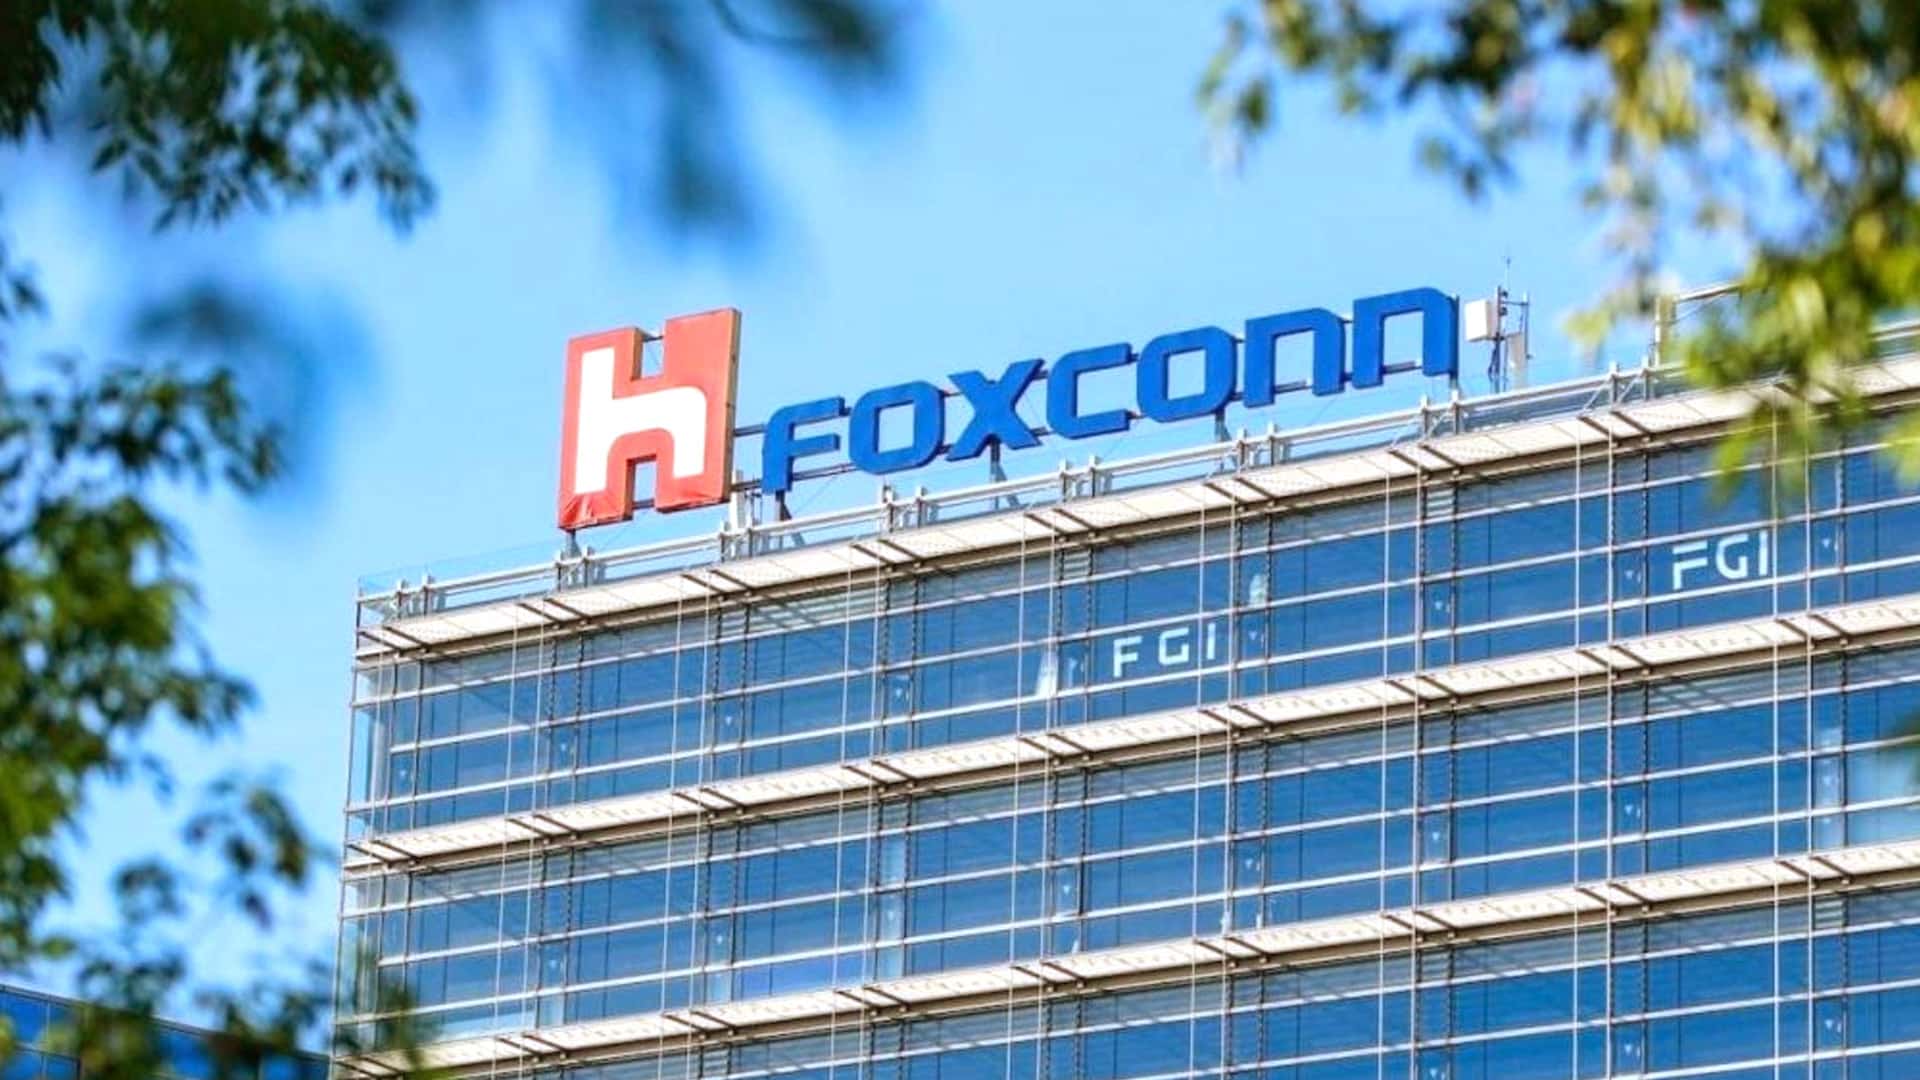 Foxconn sees opportunity to invest several billions of dollars in India